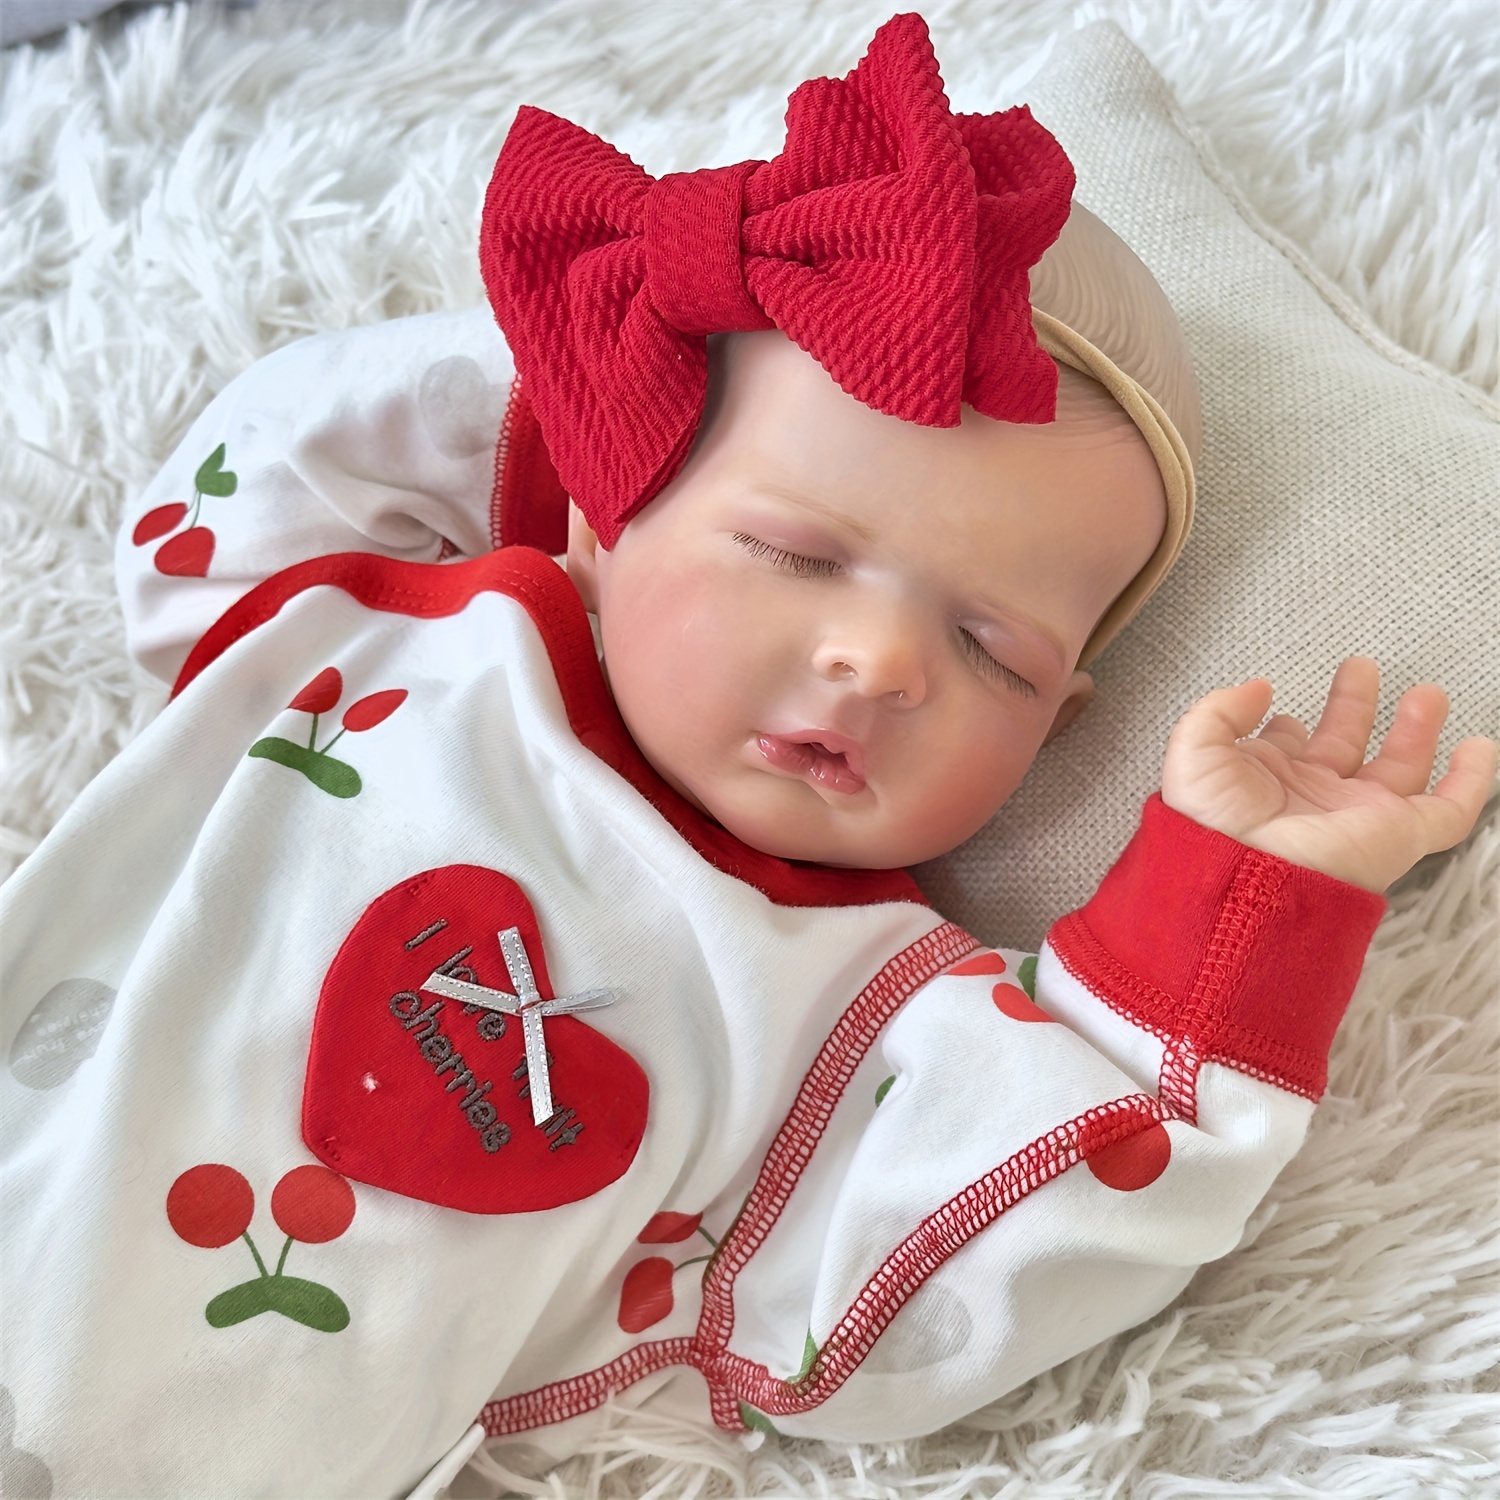 Sleeping Cuddle Therapy Realistic Reborn Baby Doll Cheap That Looks Real  Gift For Little Girl Lifelike Soft Vinyl Realistic Newborn Baby Doll 